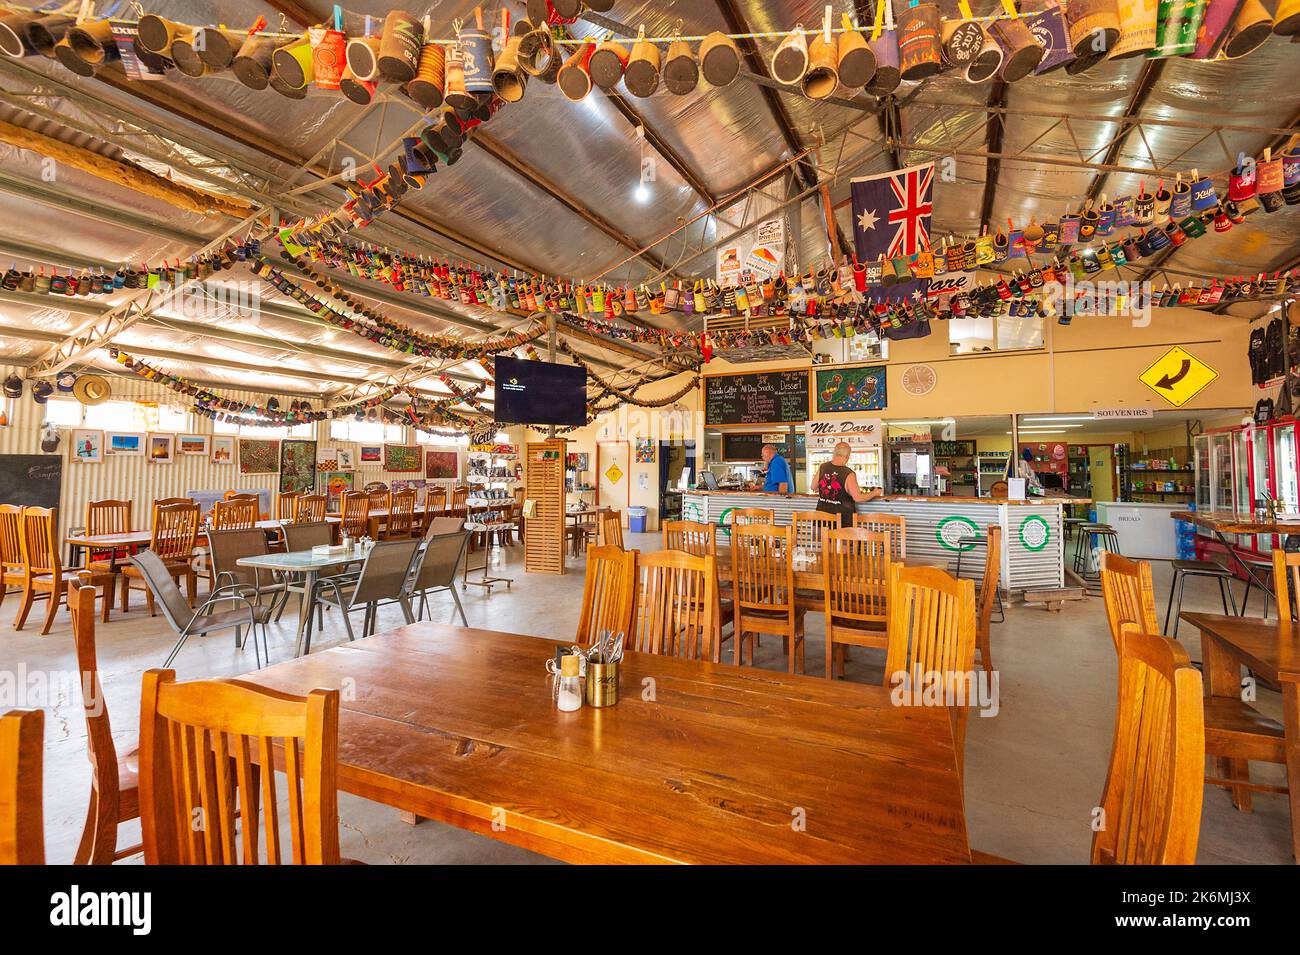 The interior of Mt Dare Hotel, a very remote pub, restaurant and campsite on the Binns Track in the Simpson Desert, Northern Territory, NT, Australia Stock Photo